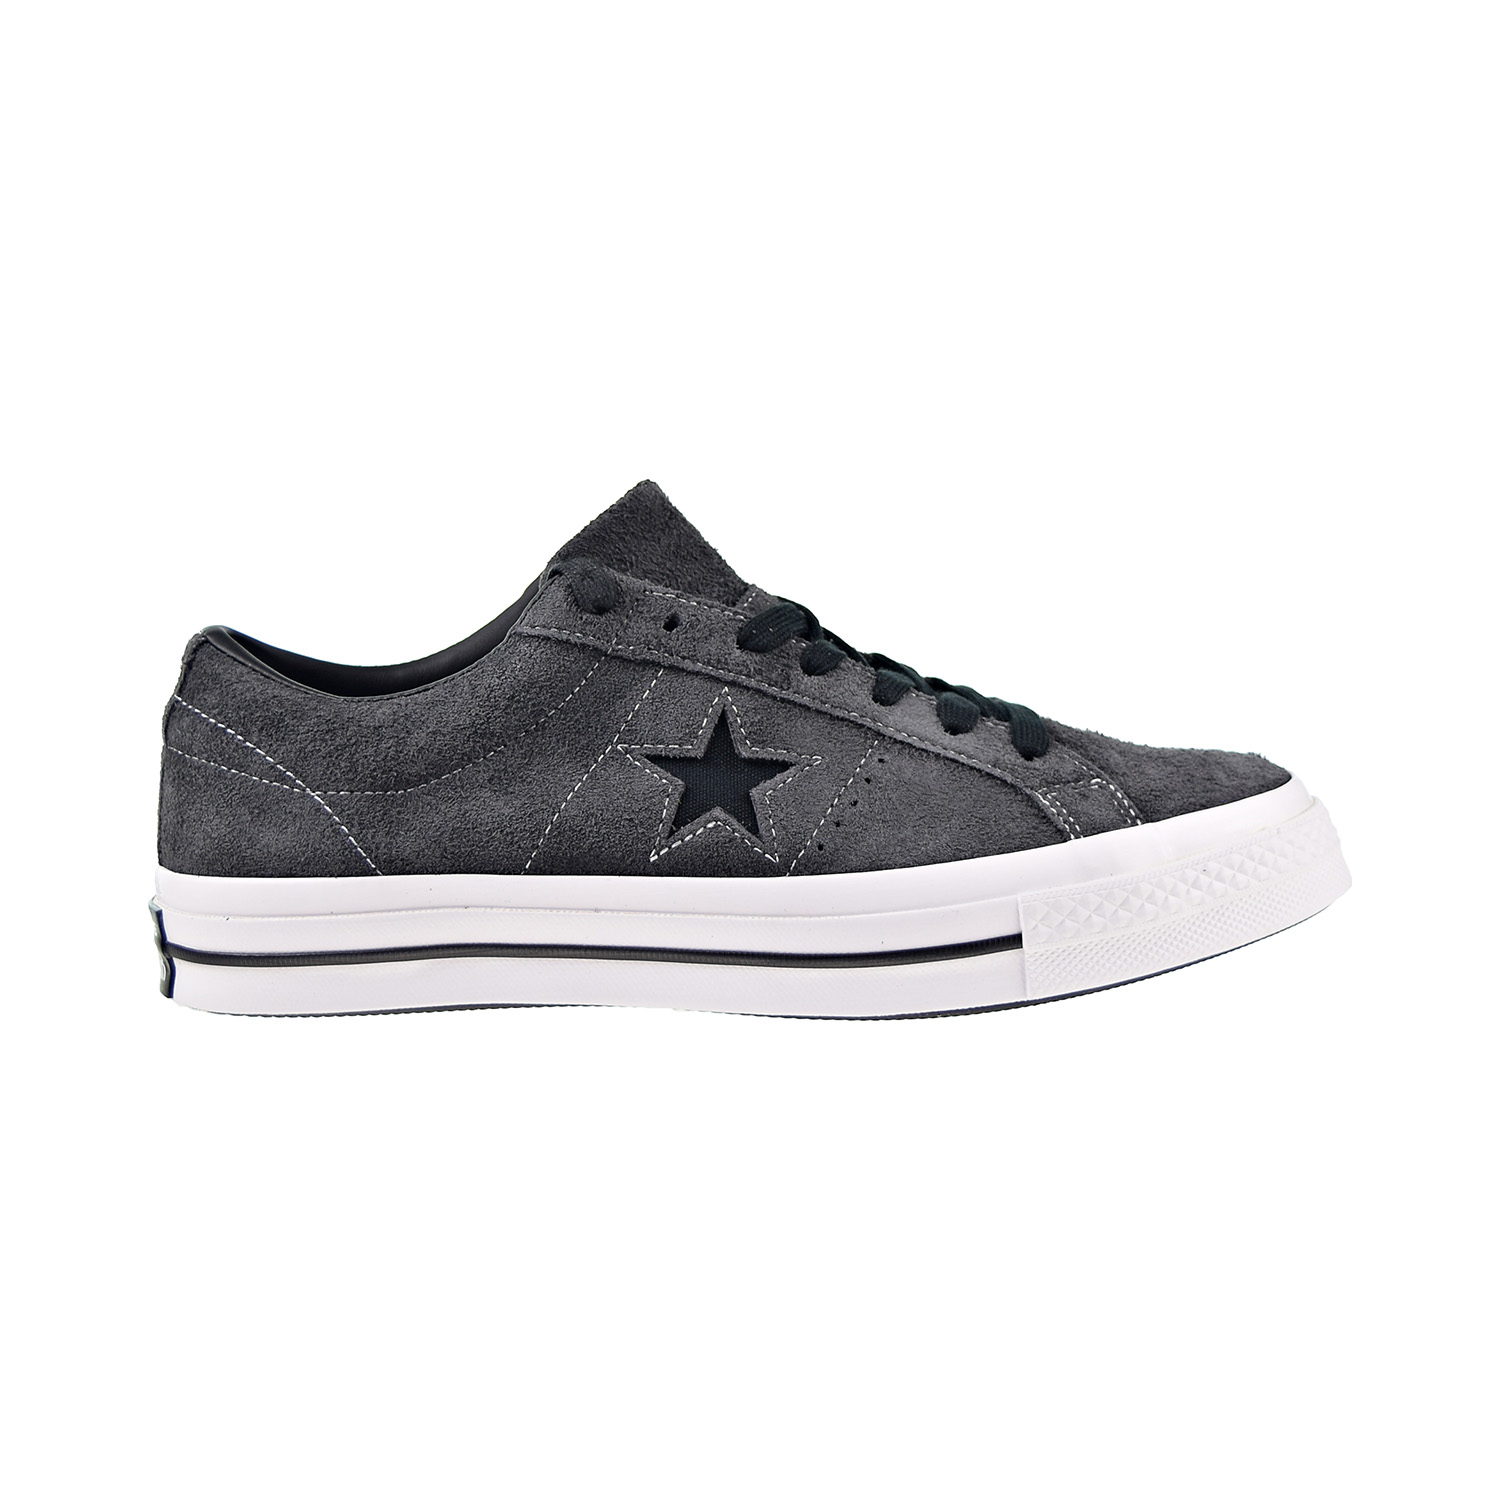 Converse One Star Ox Men's Shoes Almost Black-Black-White 163247c - image 1 of 6